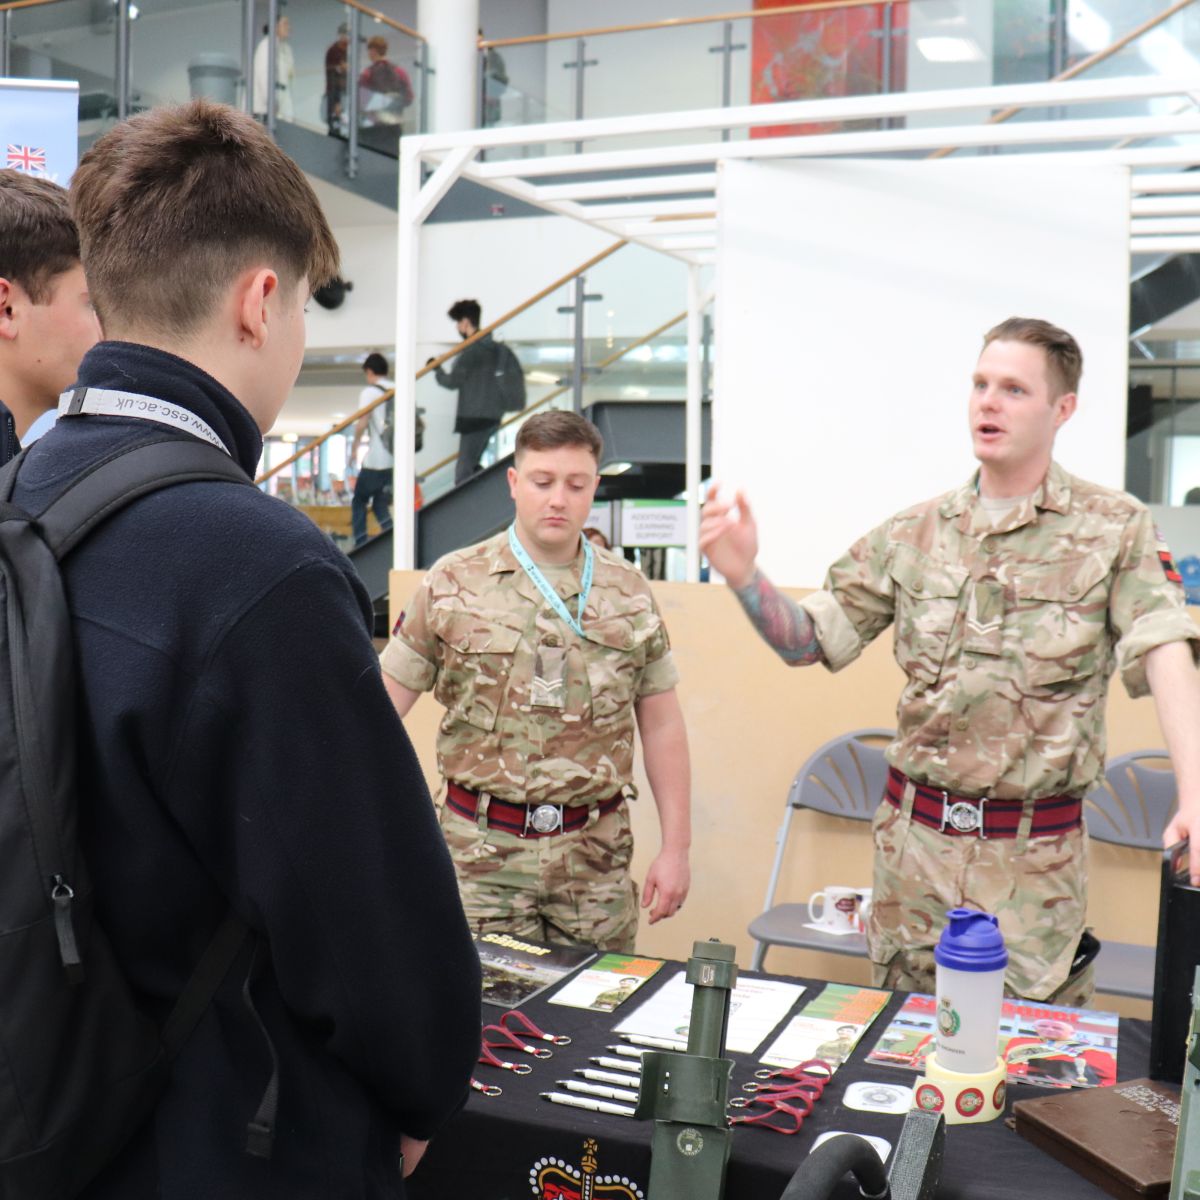 ESC student speaking with an Army representative